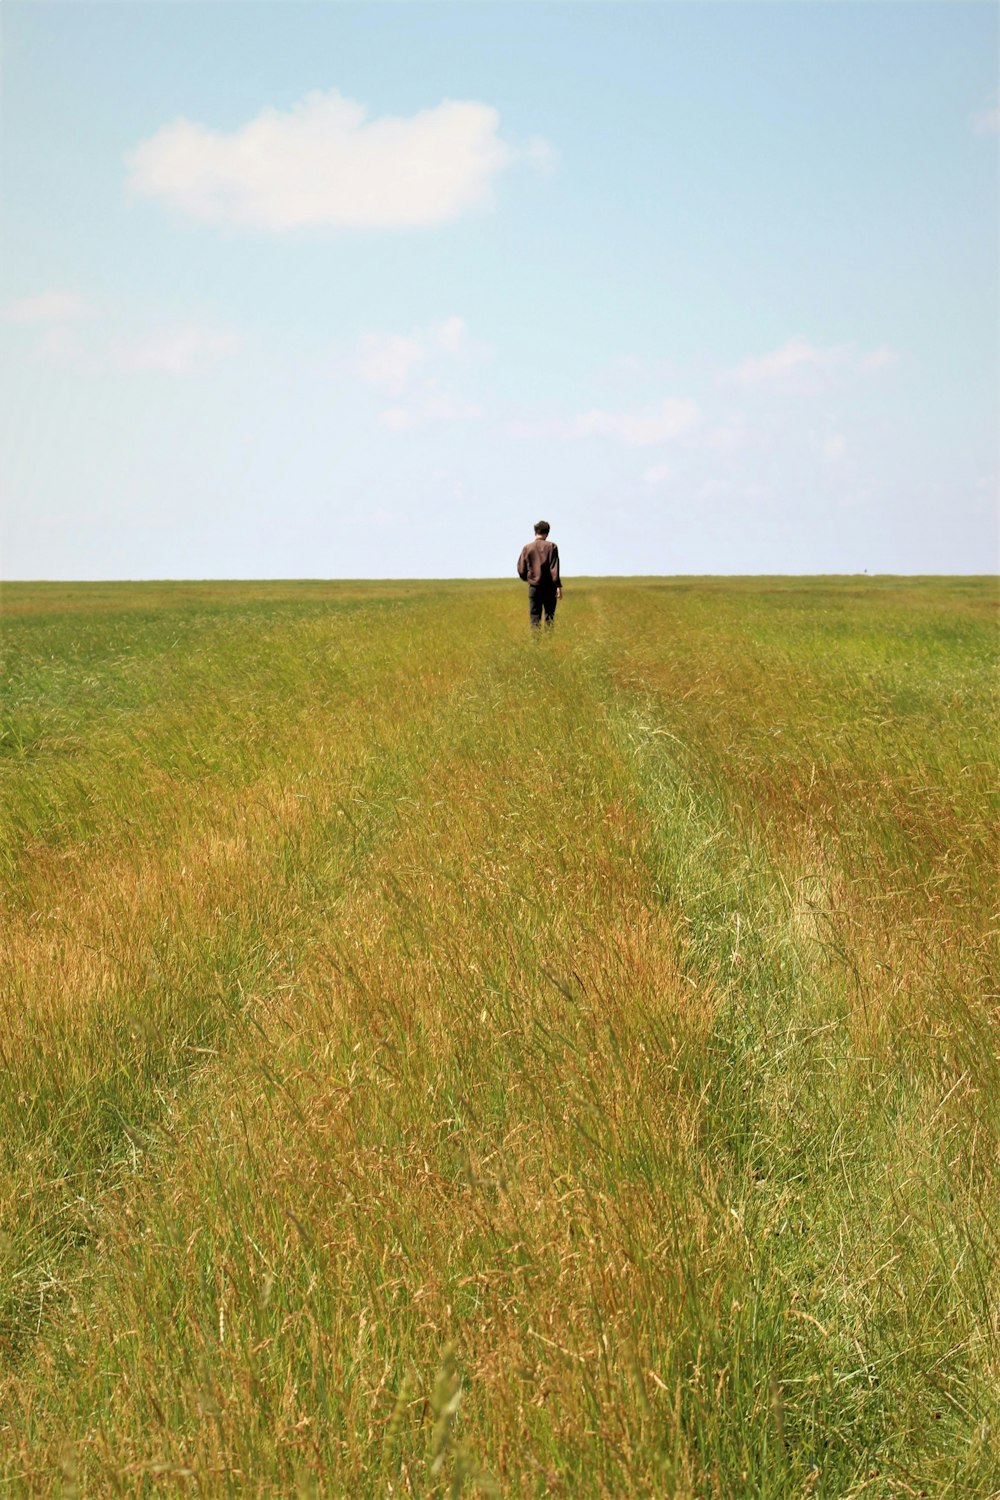 person standing on grass field during daytime